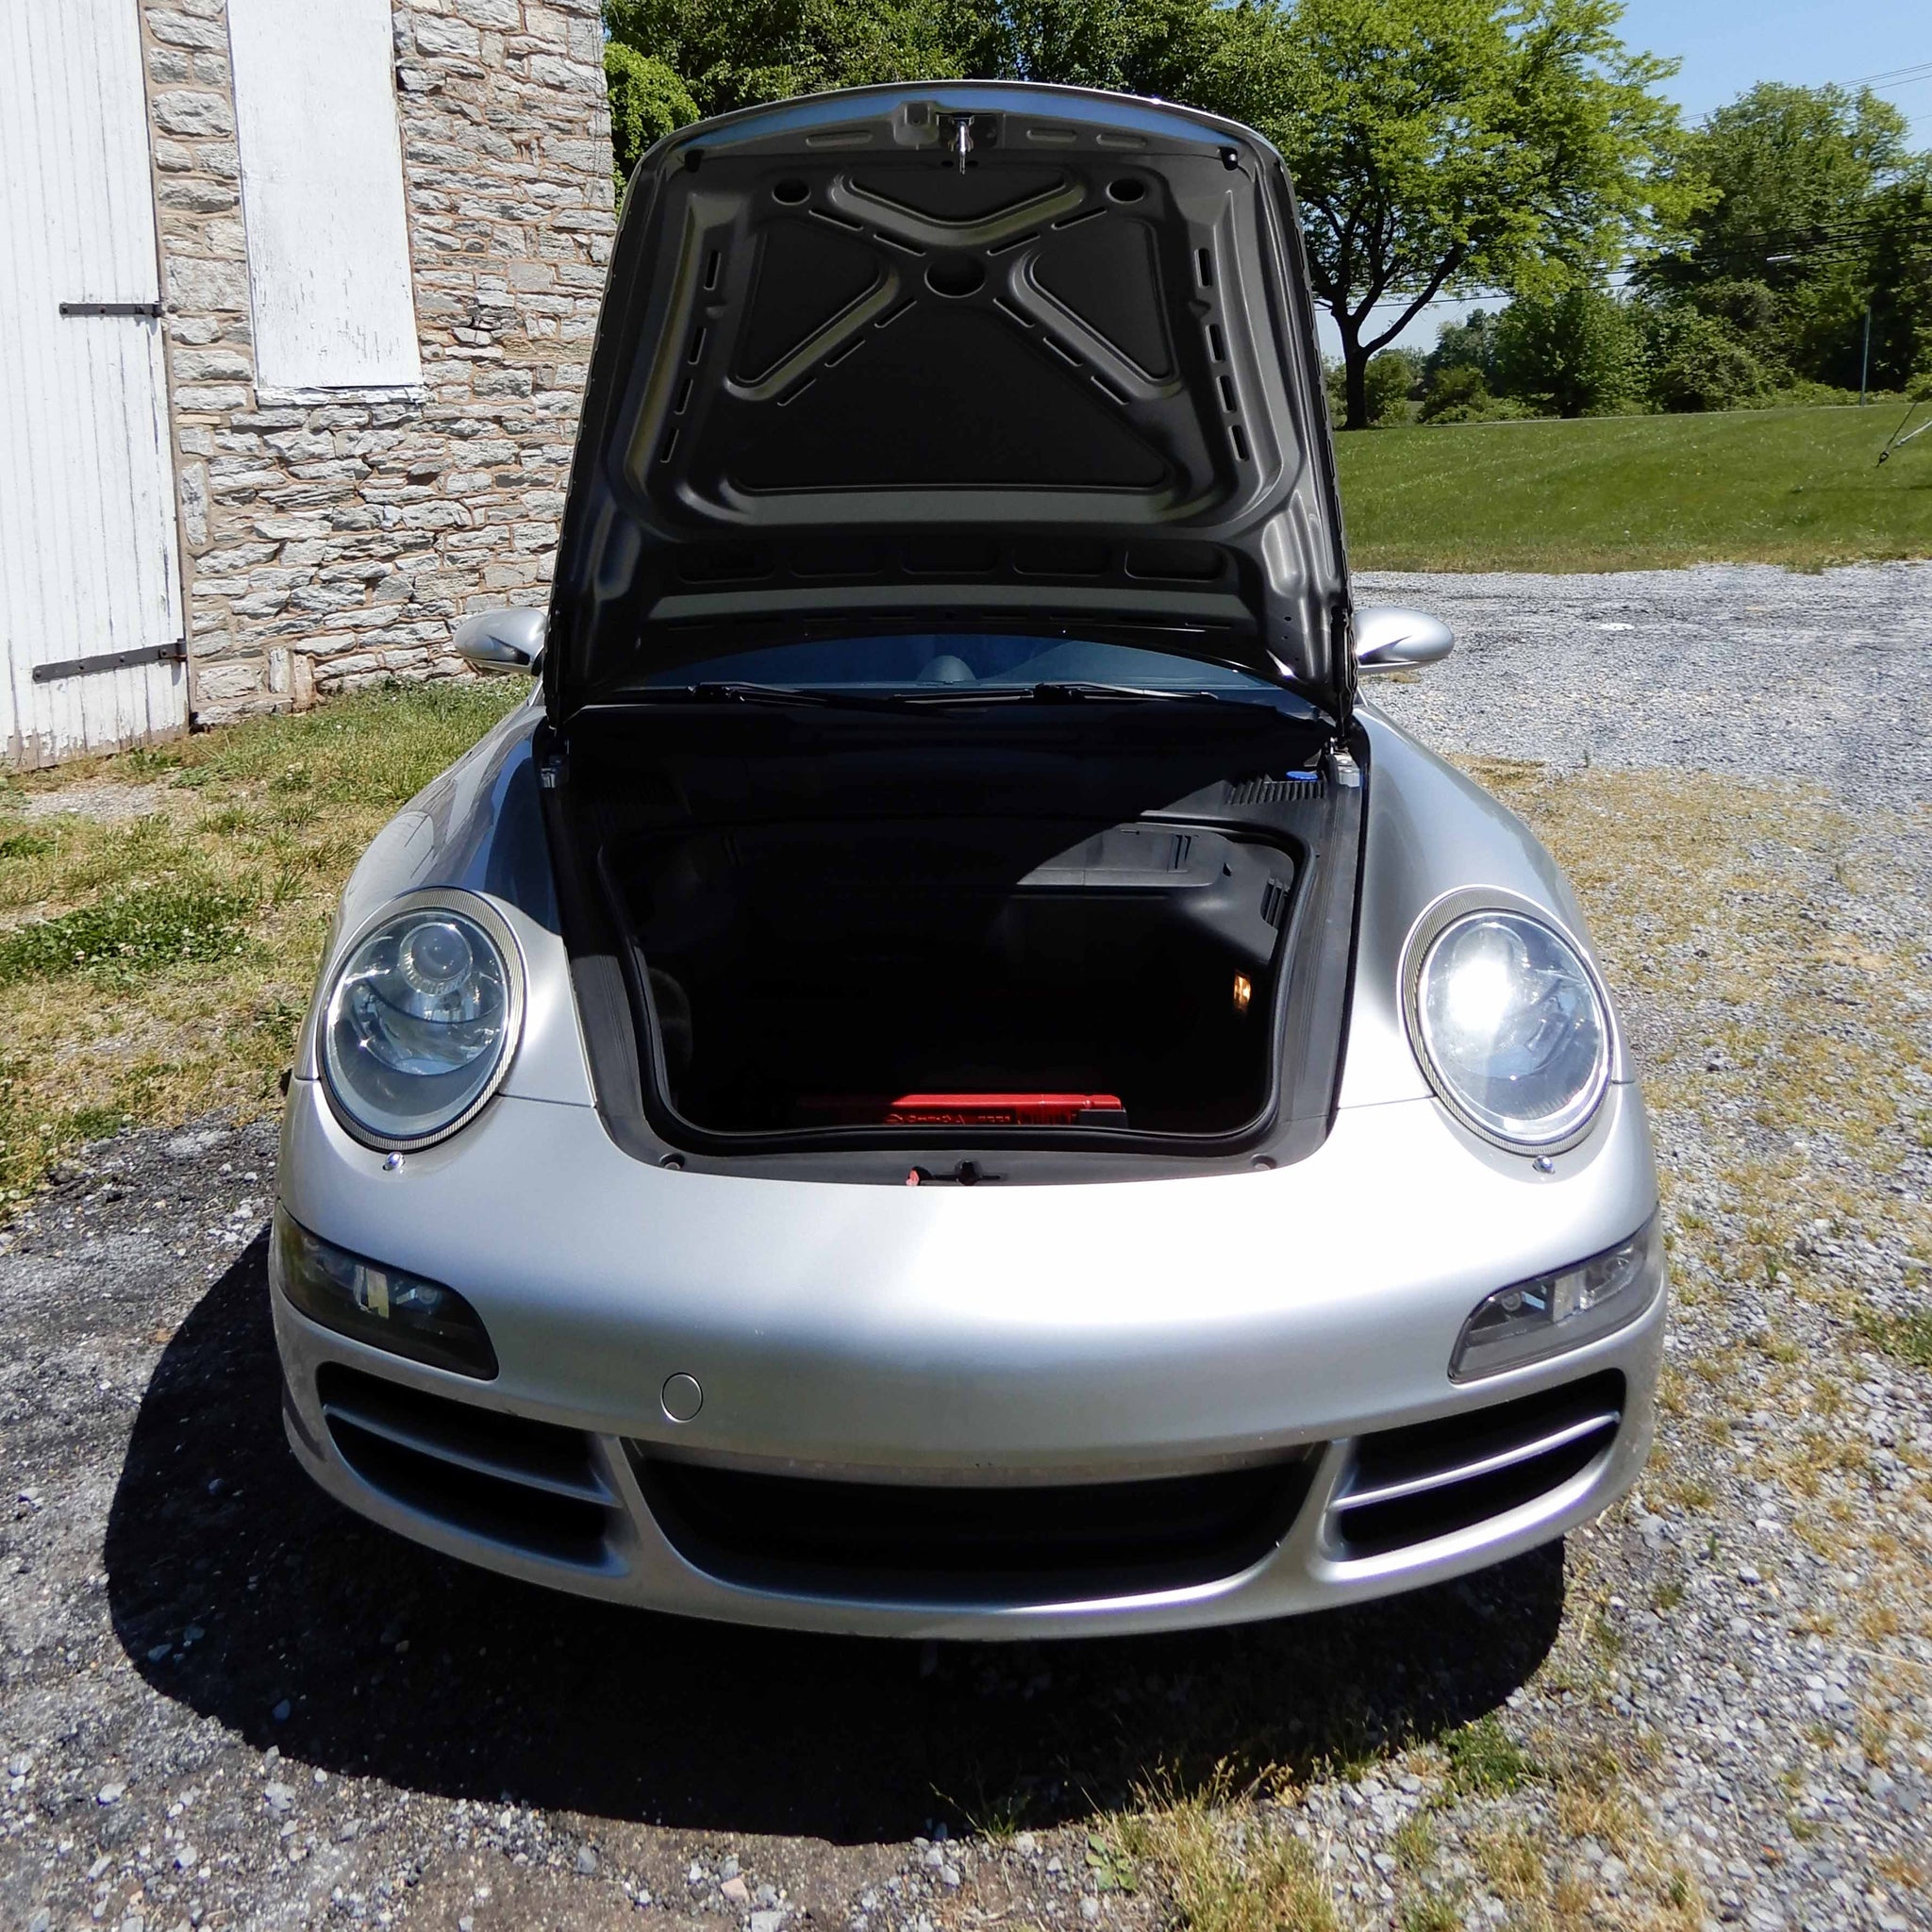 SOLD 2005 Porsche 911 Carrera S Coupe with 36k Miles and 6-Speed Manual